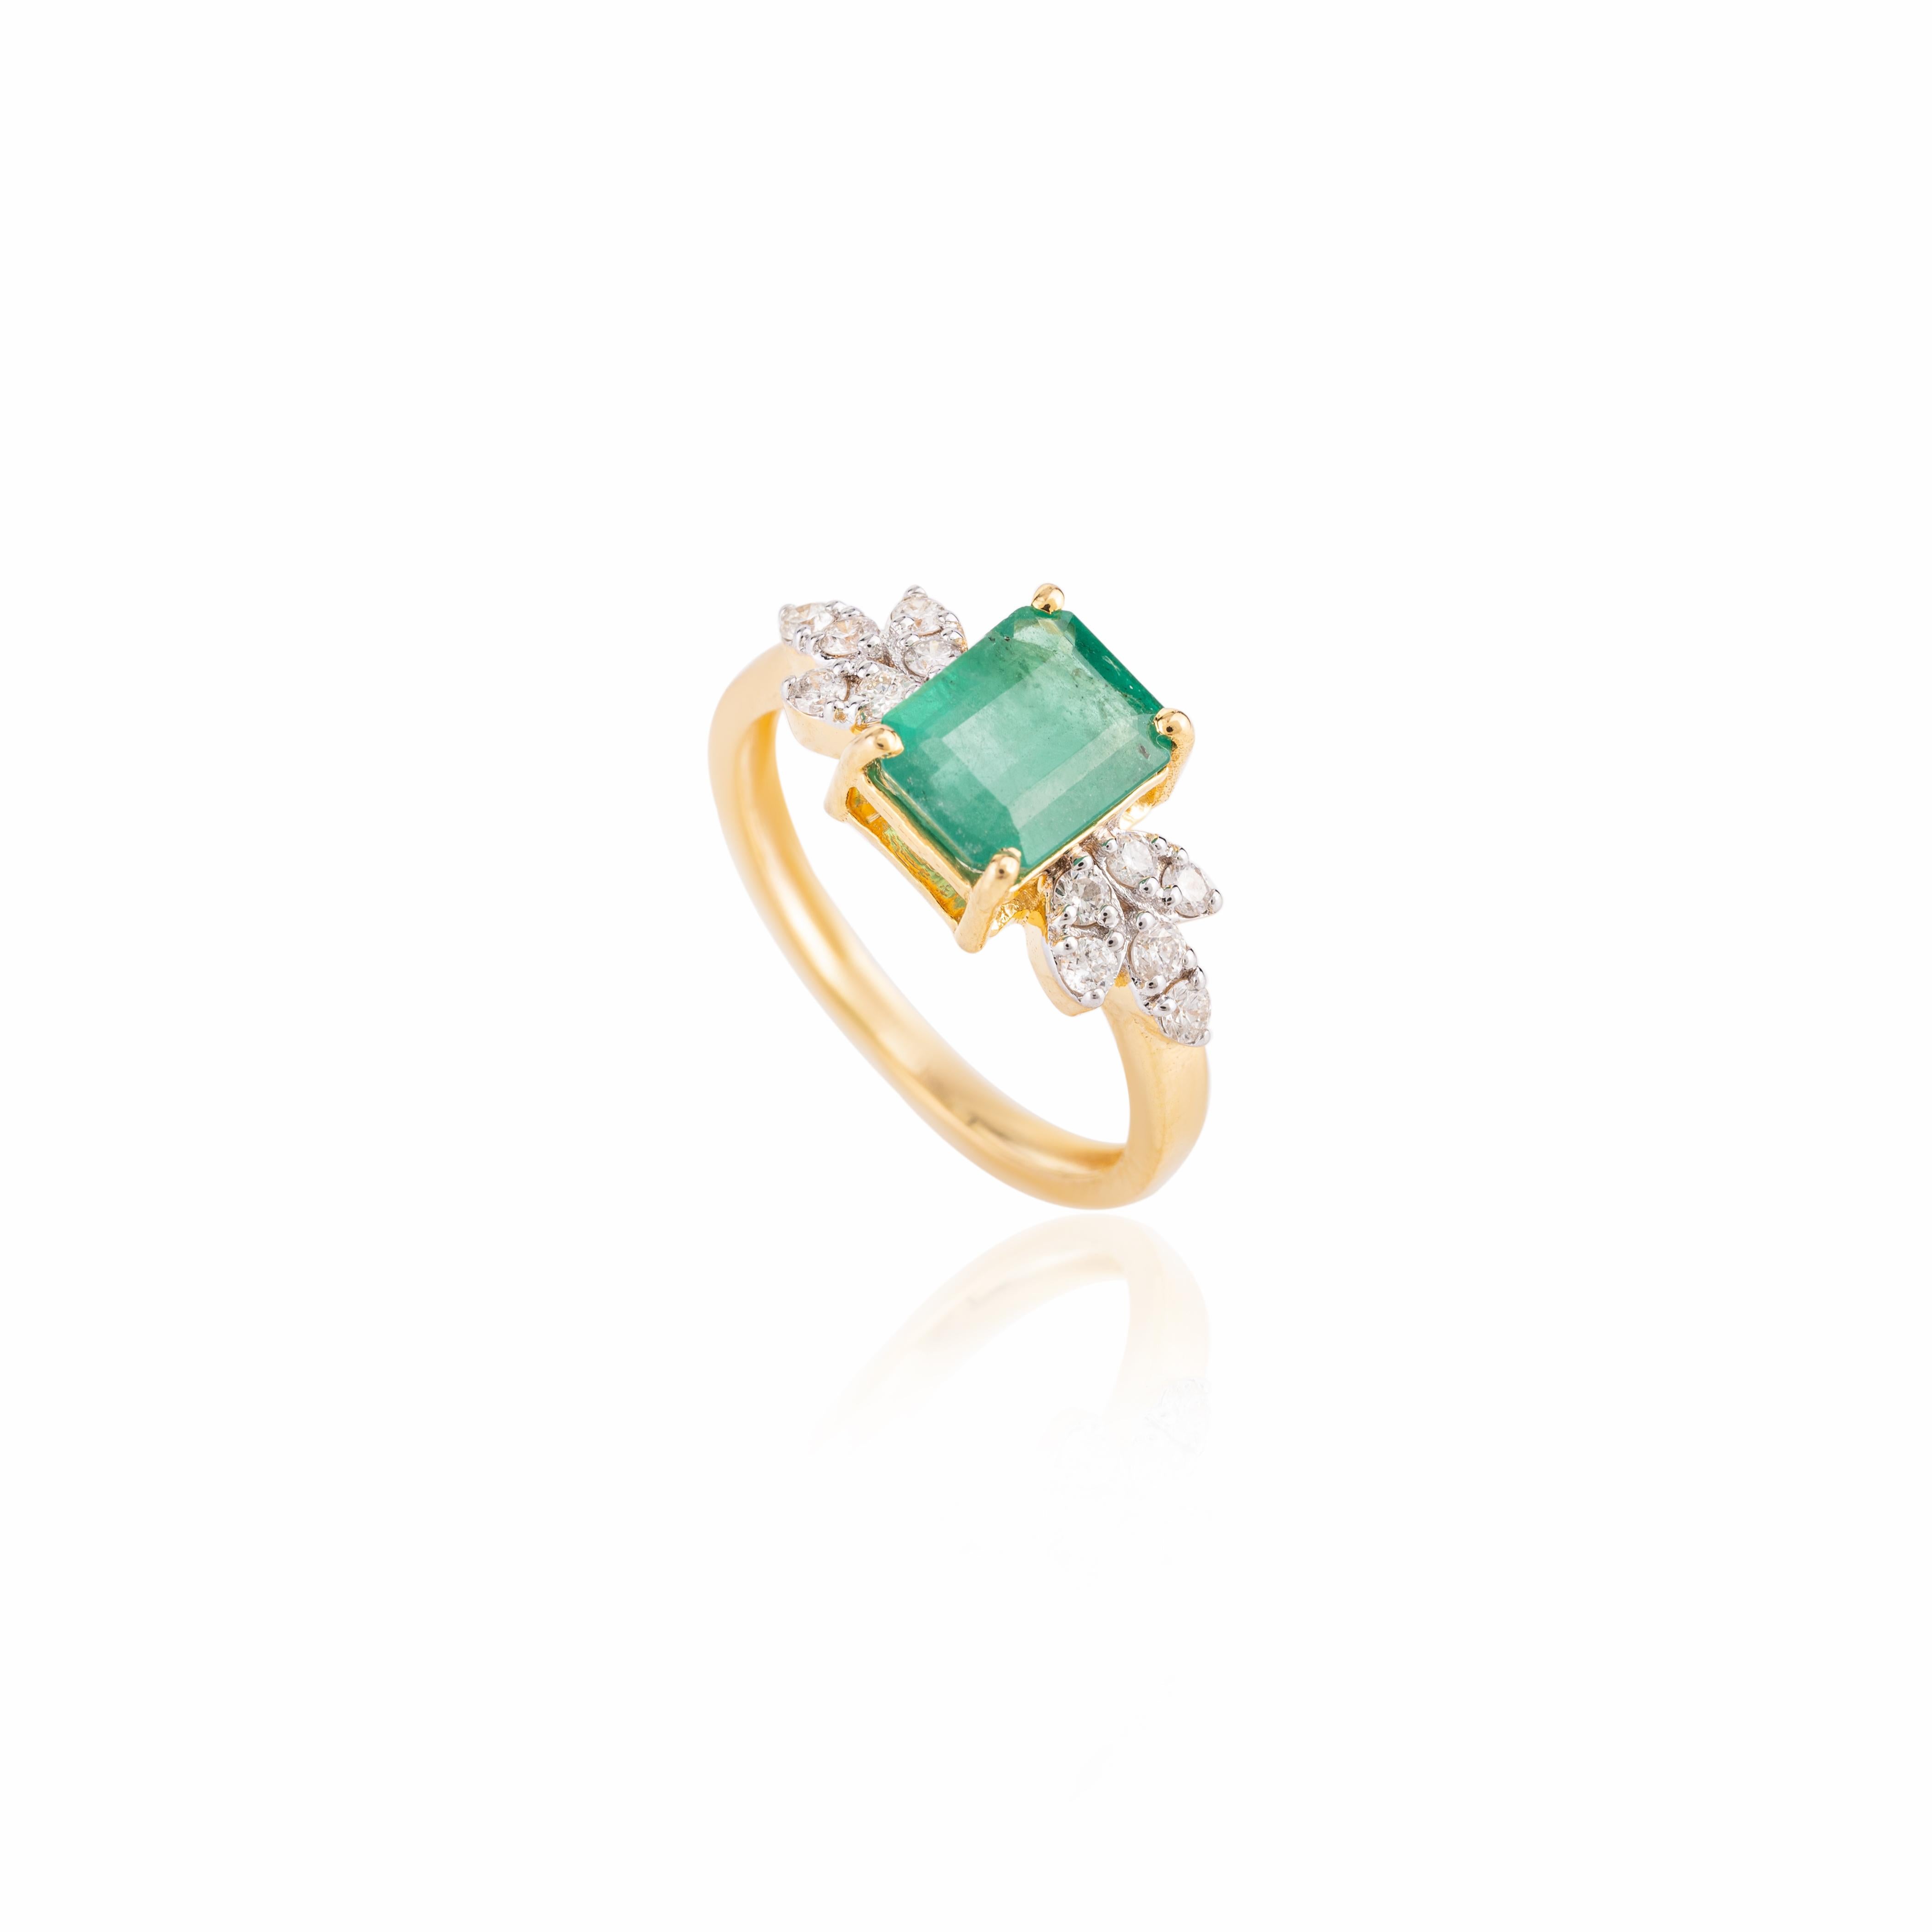 For Sale:  Natural May Birthstone Emerald Diamond 14k Yellow Gold Wedding Ring for Her 9